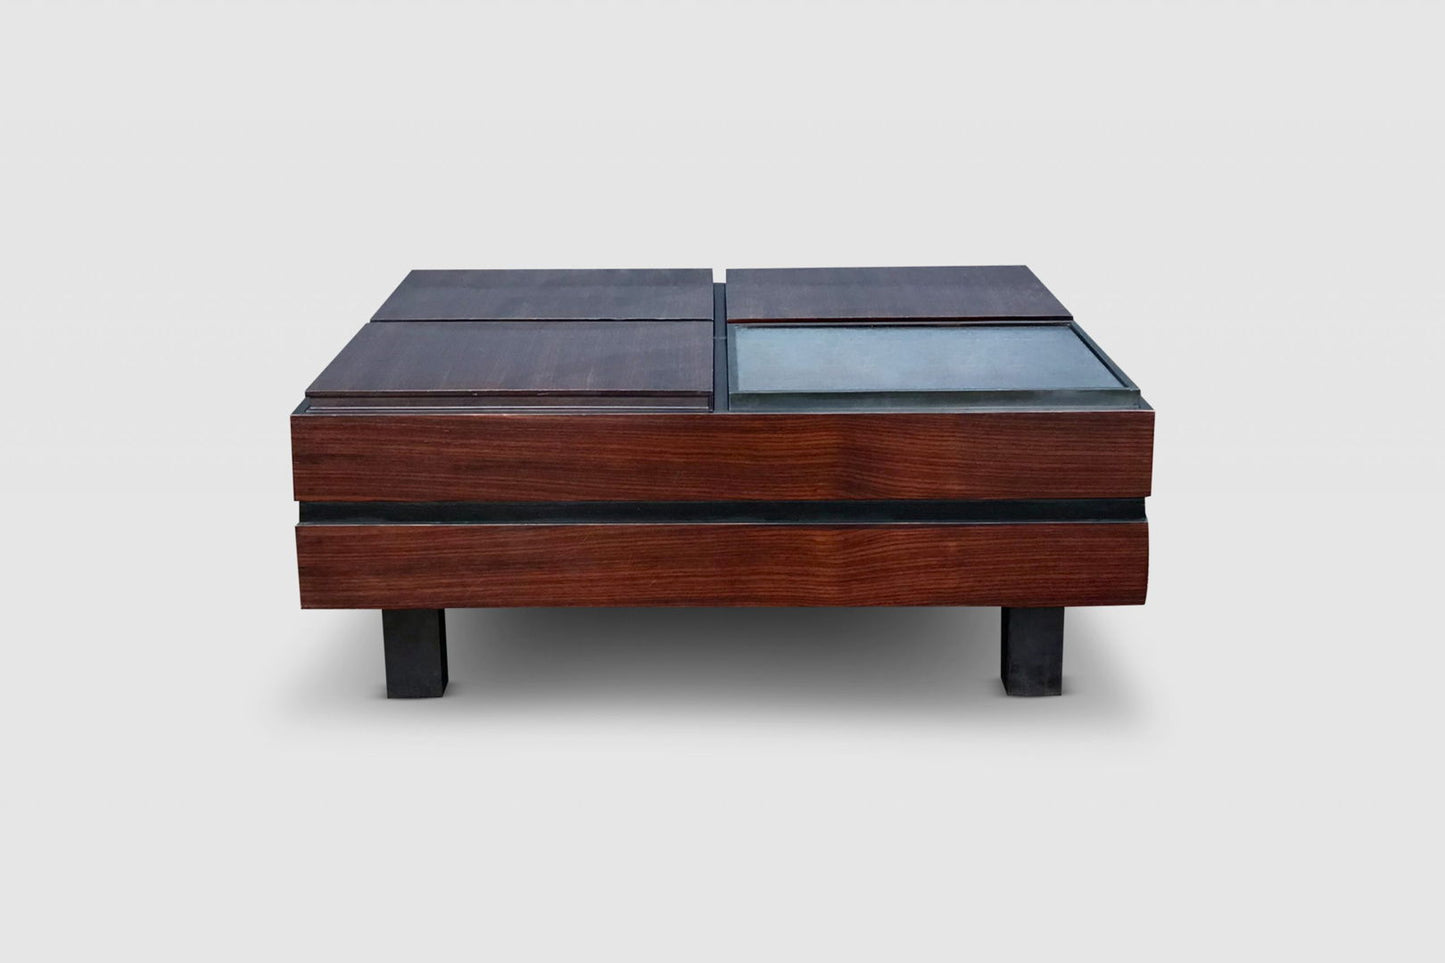 Compartmented Teak Coffee Table by Carlo Hauner for Forma Italy 1960s